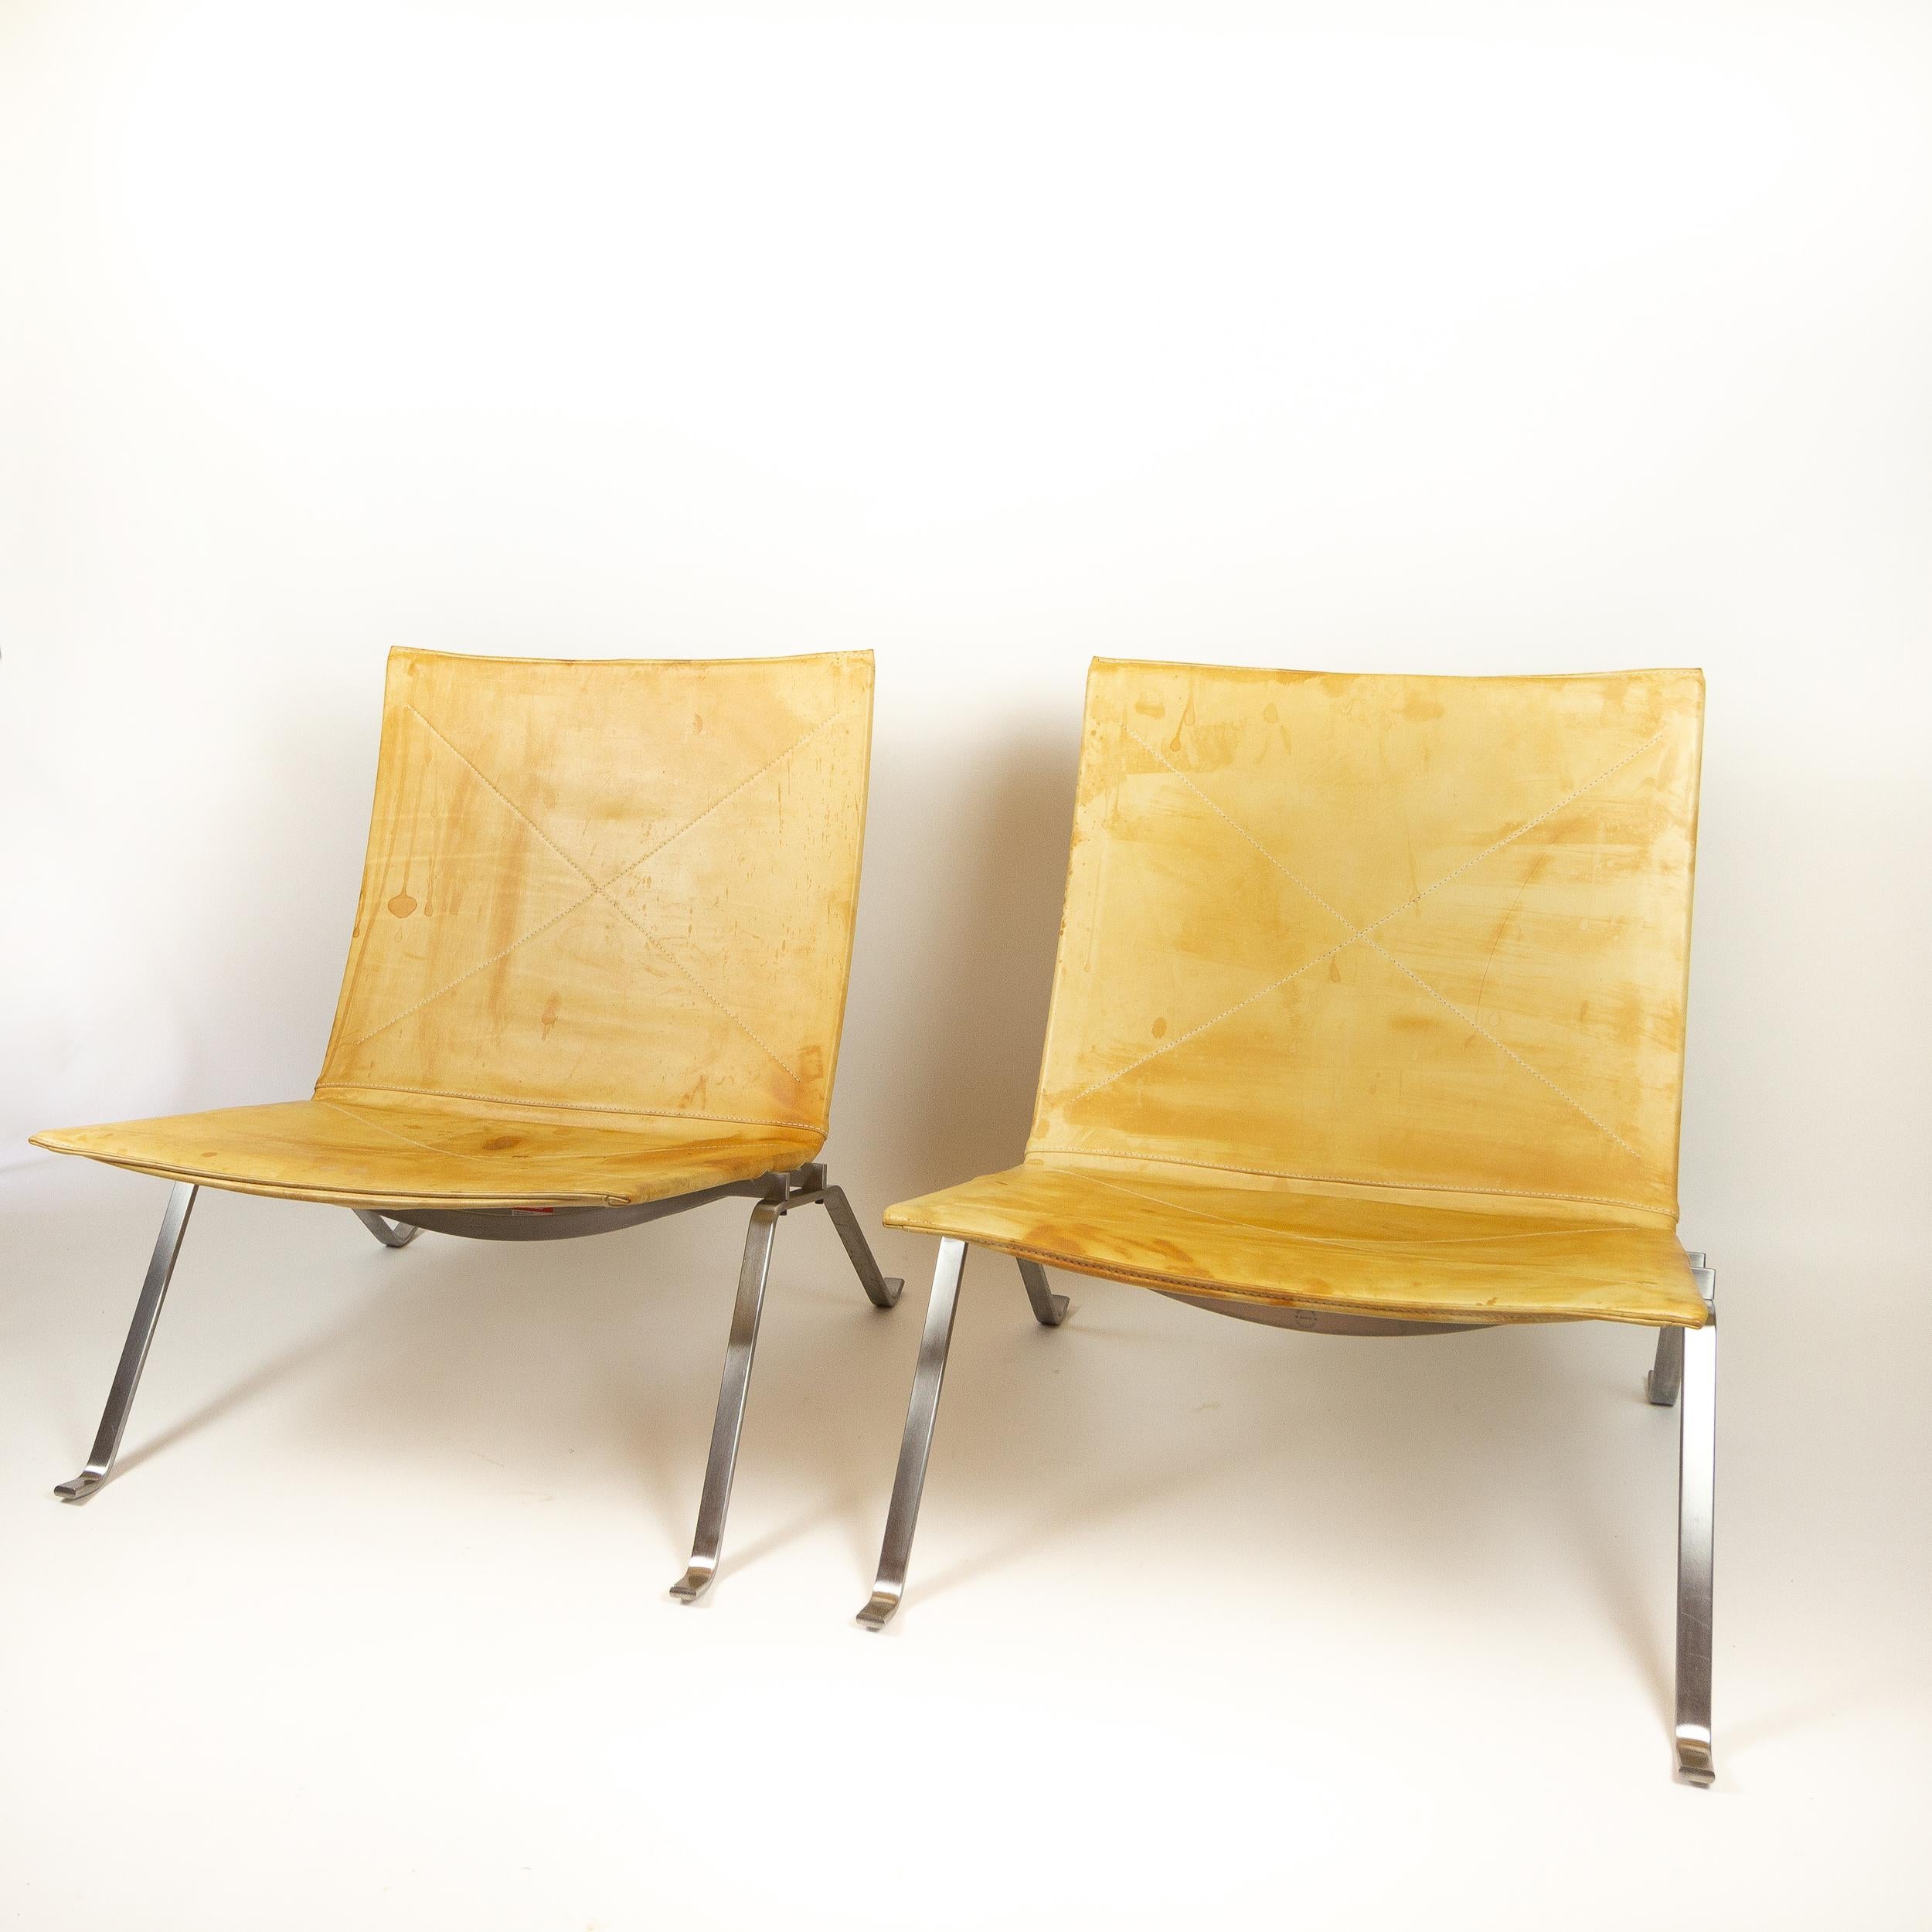 A pair of Poul Kjærholm PK22 chairs in natural tan hide for Fritz Hansen. Without doubt Kjærholm's most iconic chair. Designed in 1955.